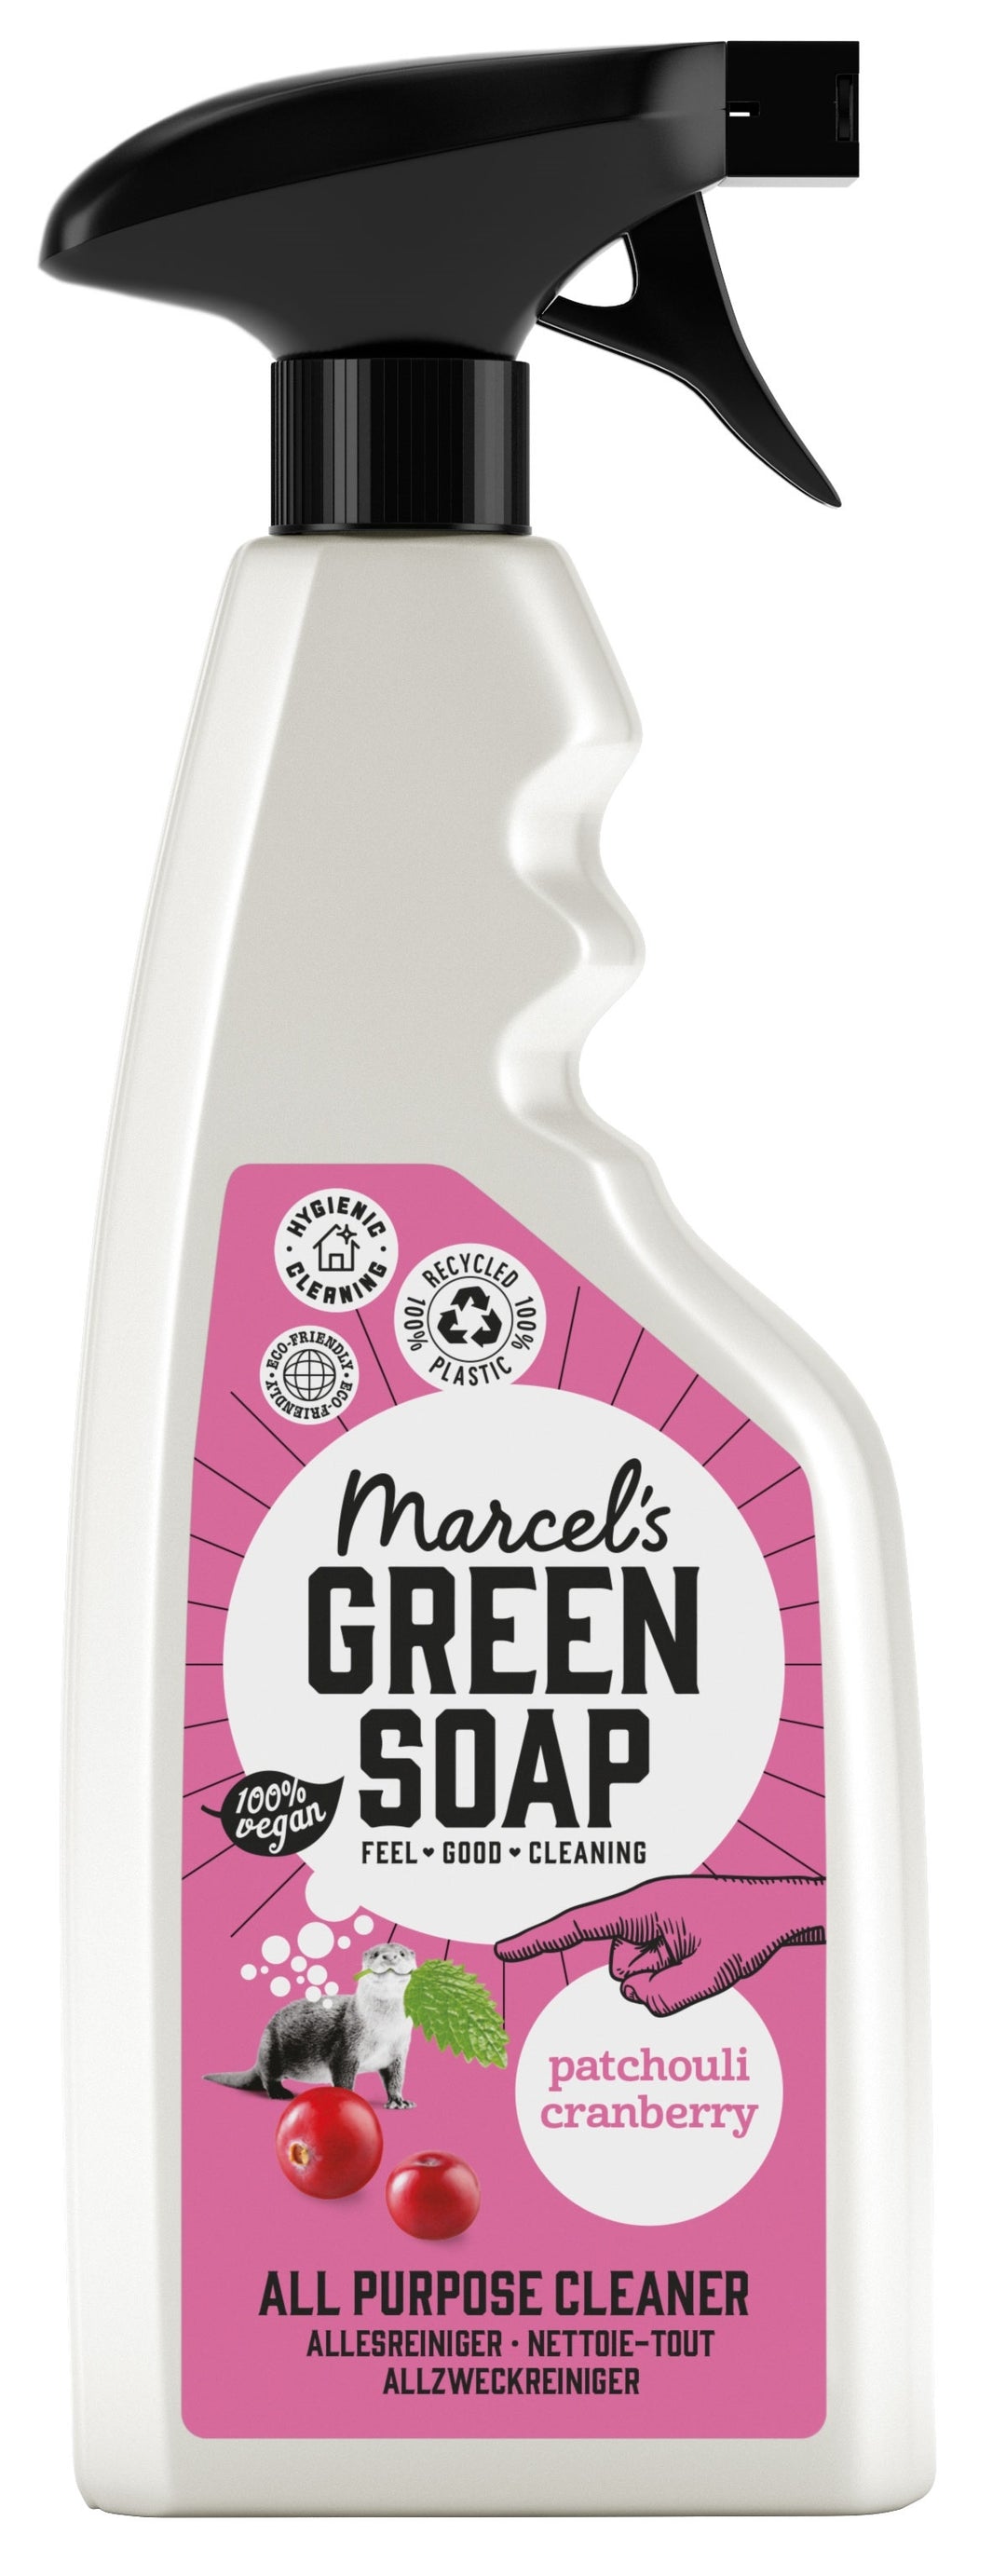 Marcel's Green Soap Patchouli & Cranberry All Purpose Cleaner Spray 500ml